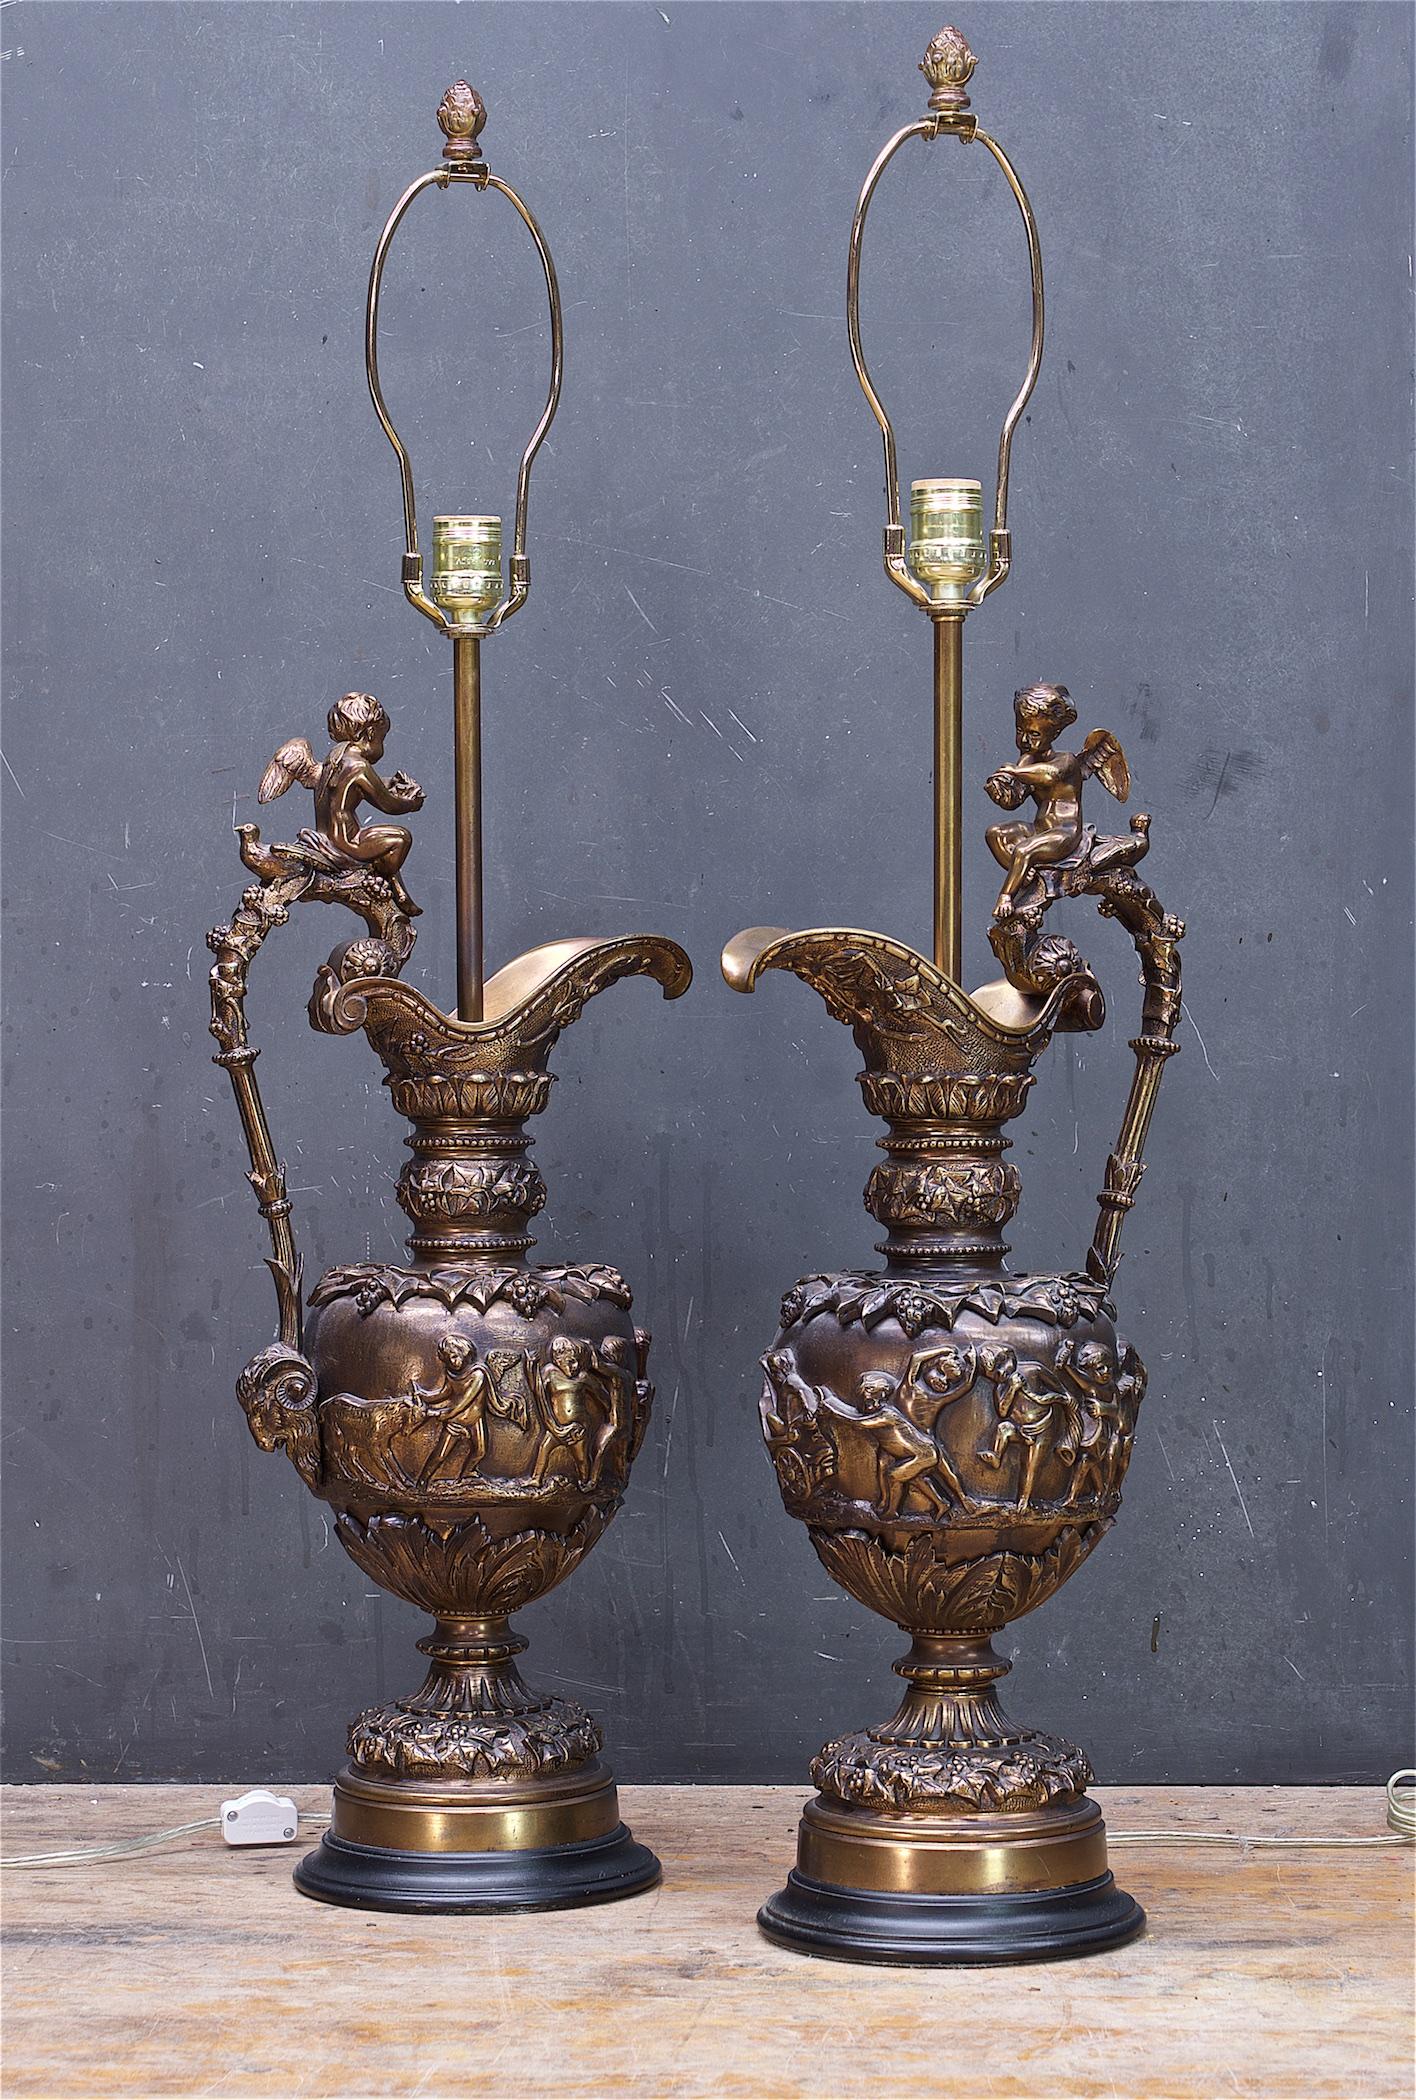 Greco Roman Antique Bronze Ewers Bacchus Table Lamps Maximalist Luxury Neoclassical For Sale